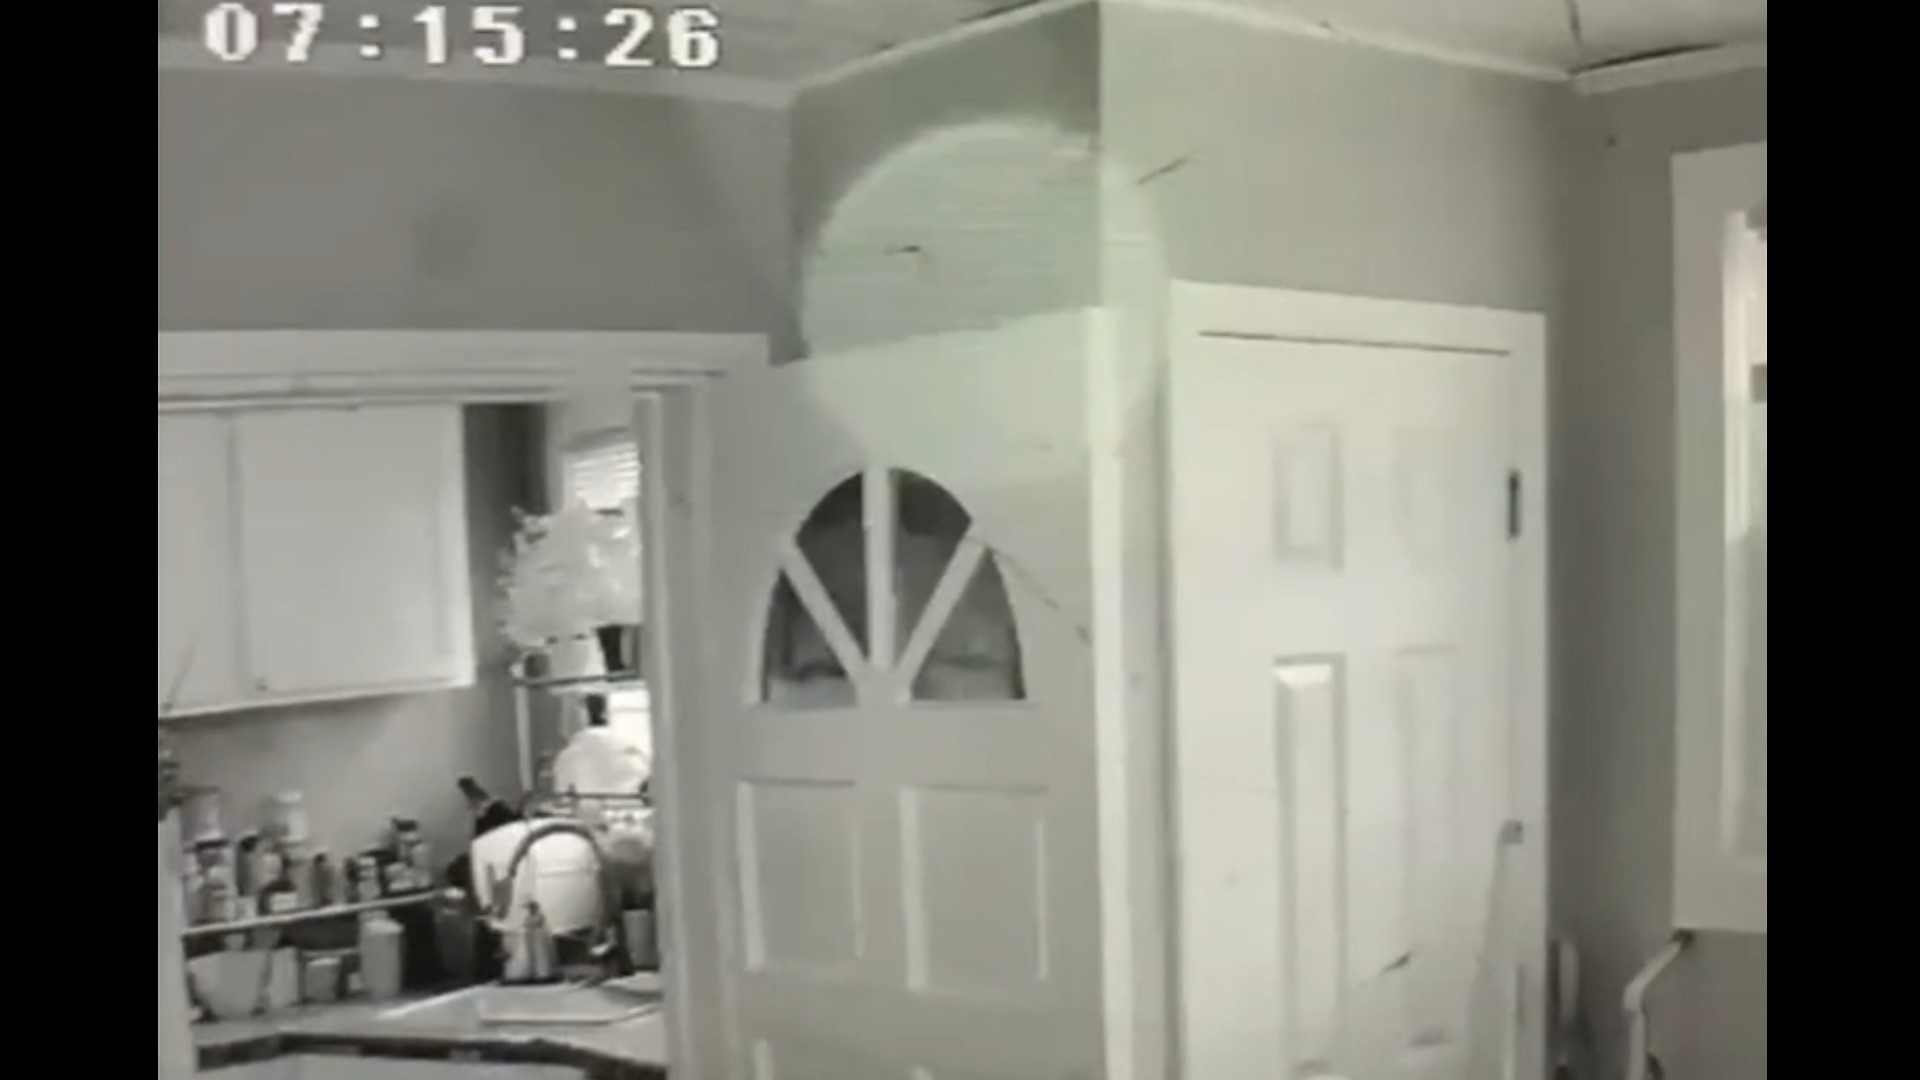 A Jacksonville woman said she installed web cameras in her home because of strange activity. This is what it recorded Monday morning and she can't explain it.